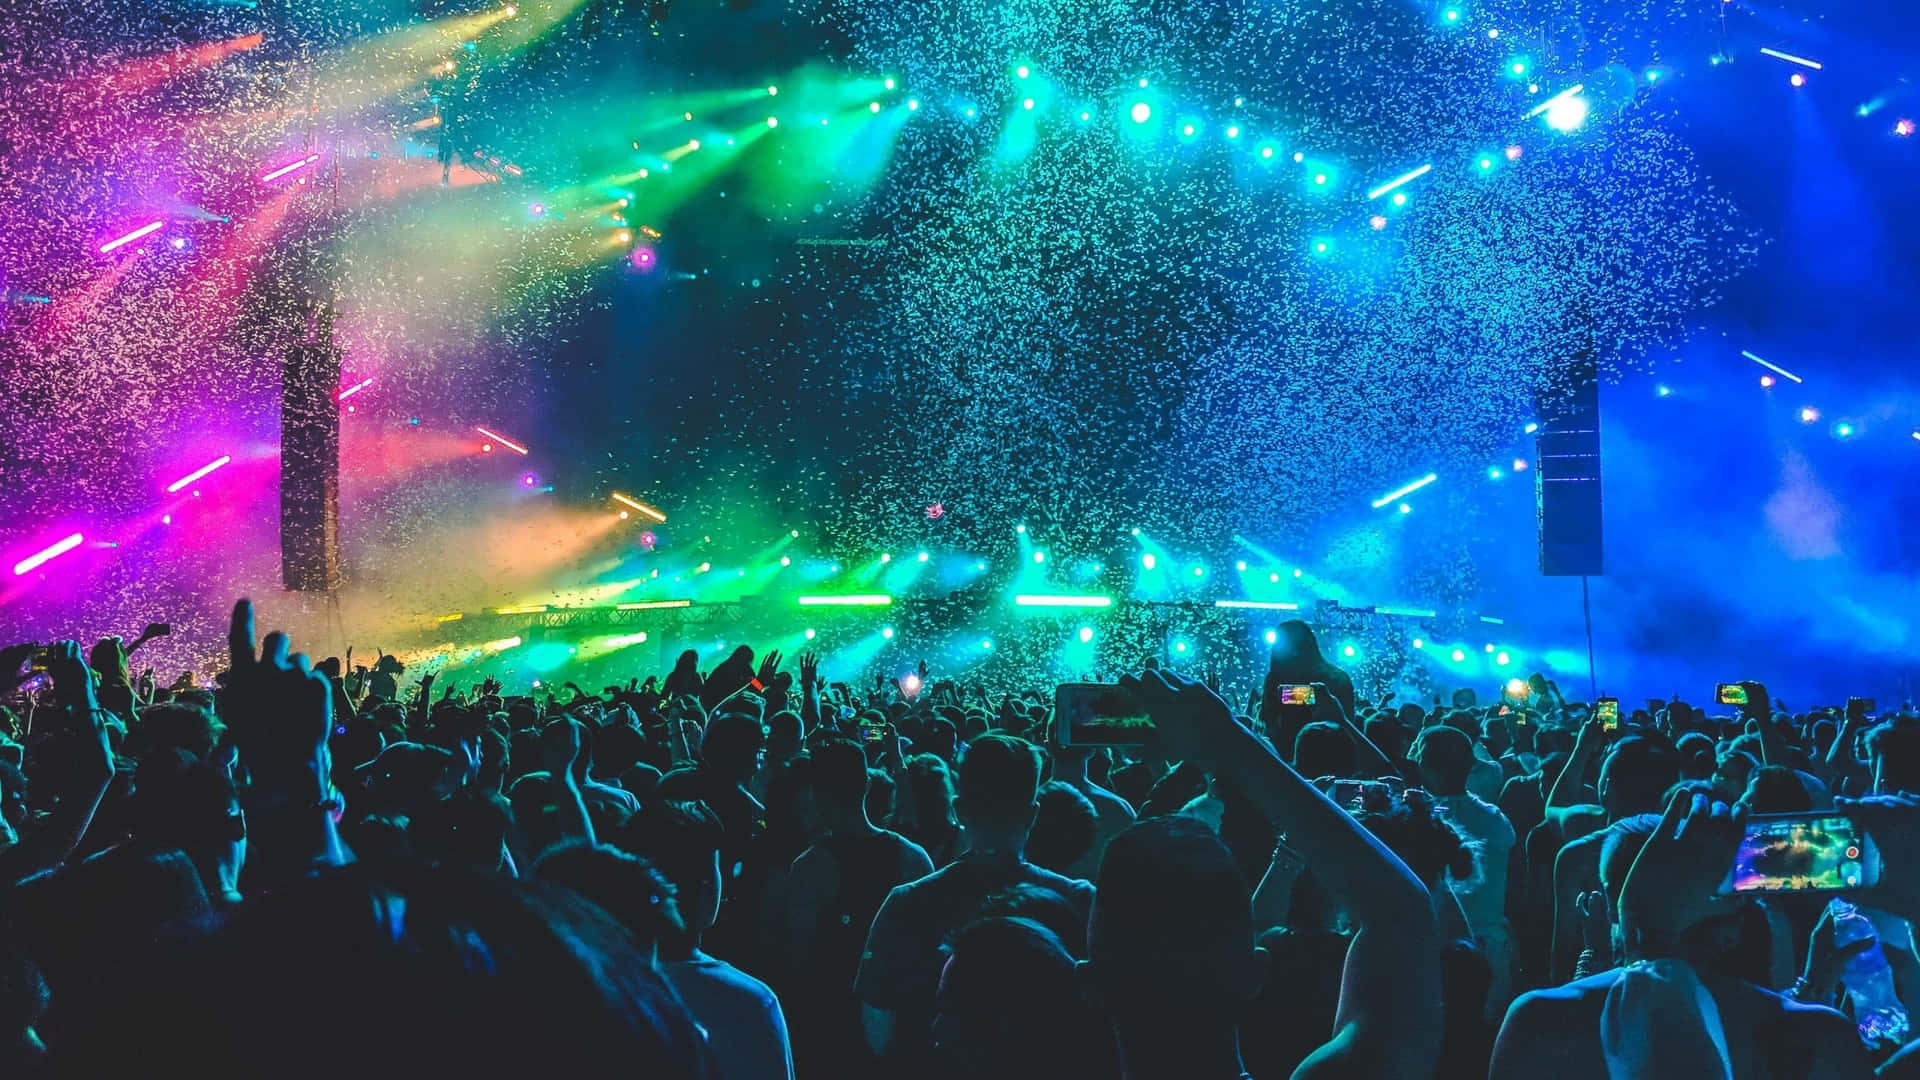 A Crowd At A Concert With Colorful Lights